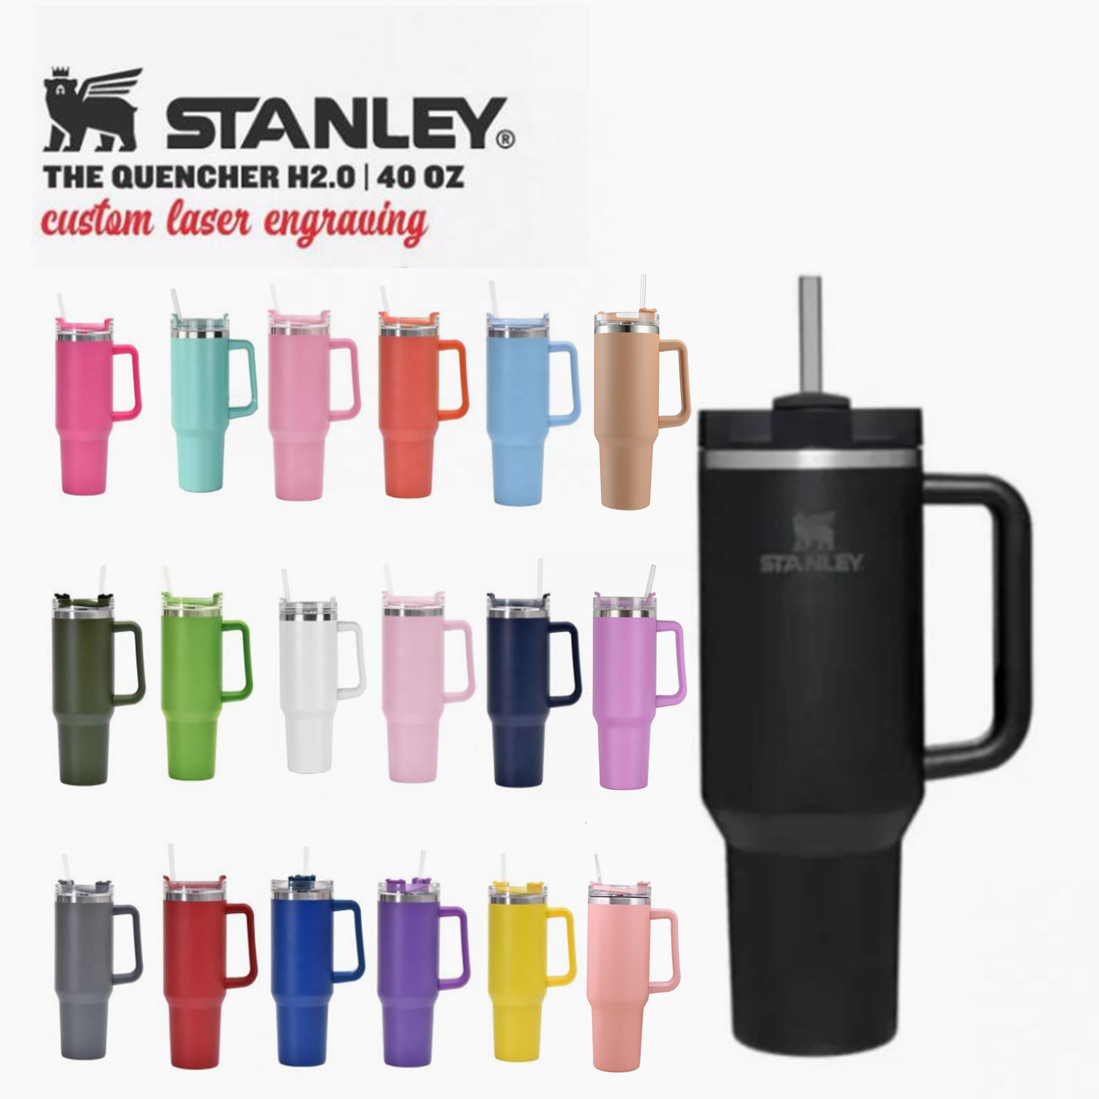 

40oz Stanley Tumblers Cups With Handle Lids and Straws Stainless Steel Coffee Tumbler Car Mugs Termos Water Bottles with Logo FY5544 In 20 Colors, White